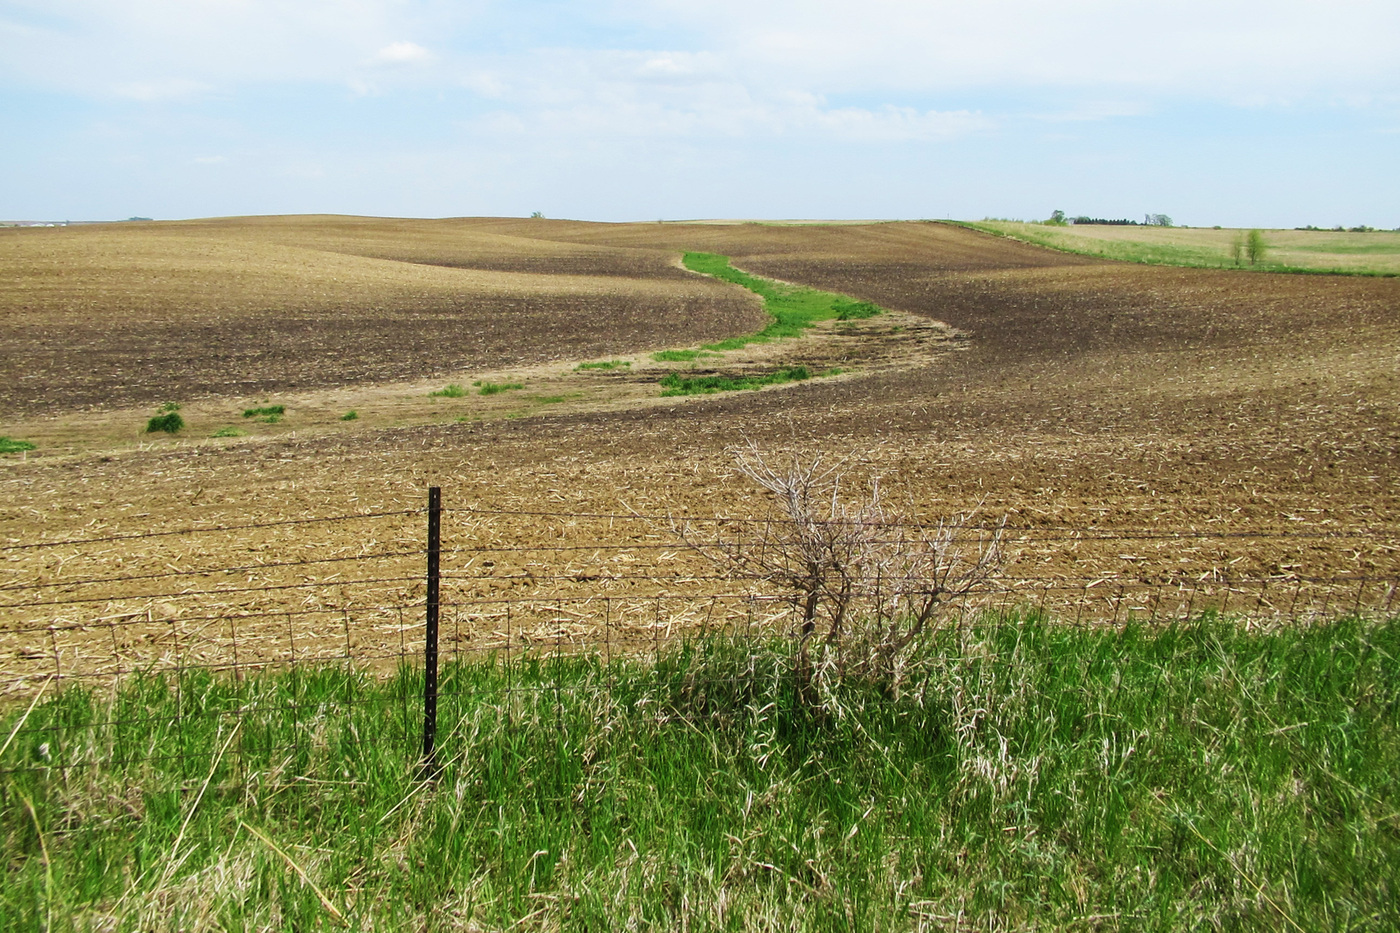 New evidence shows fertile soil gone from Midwestern farms